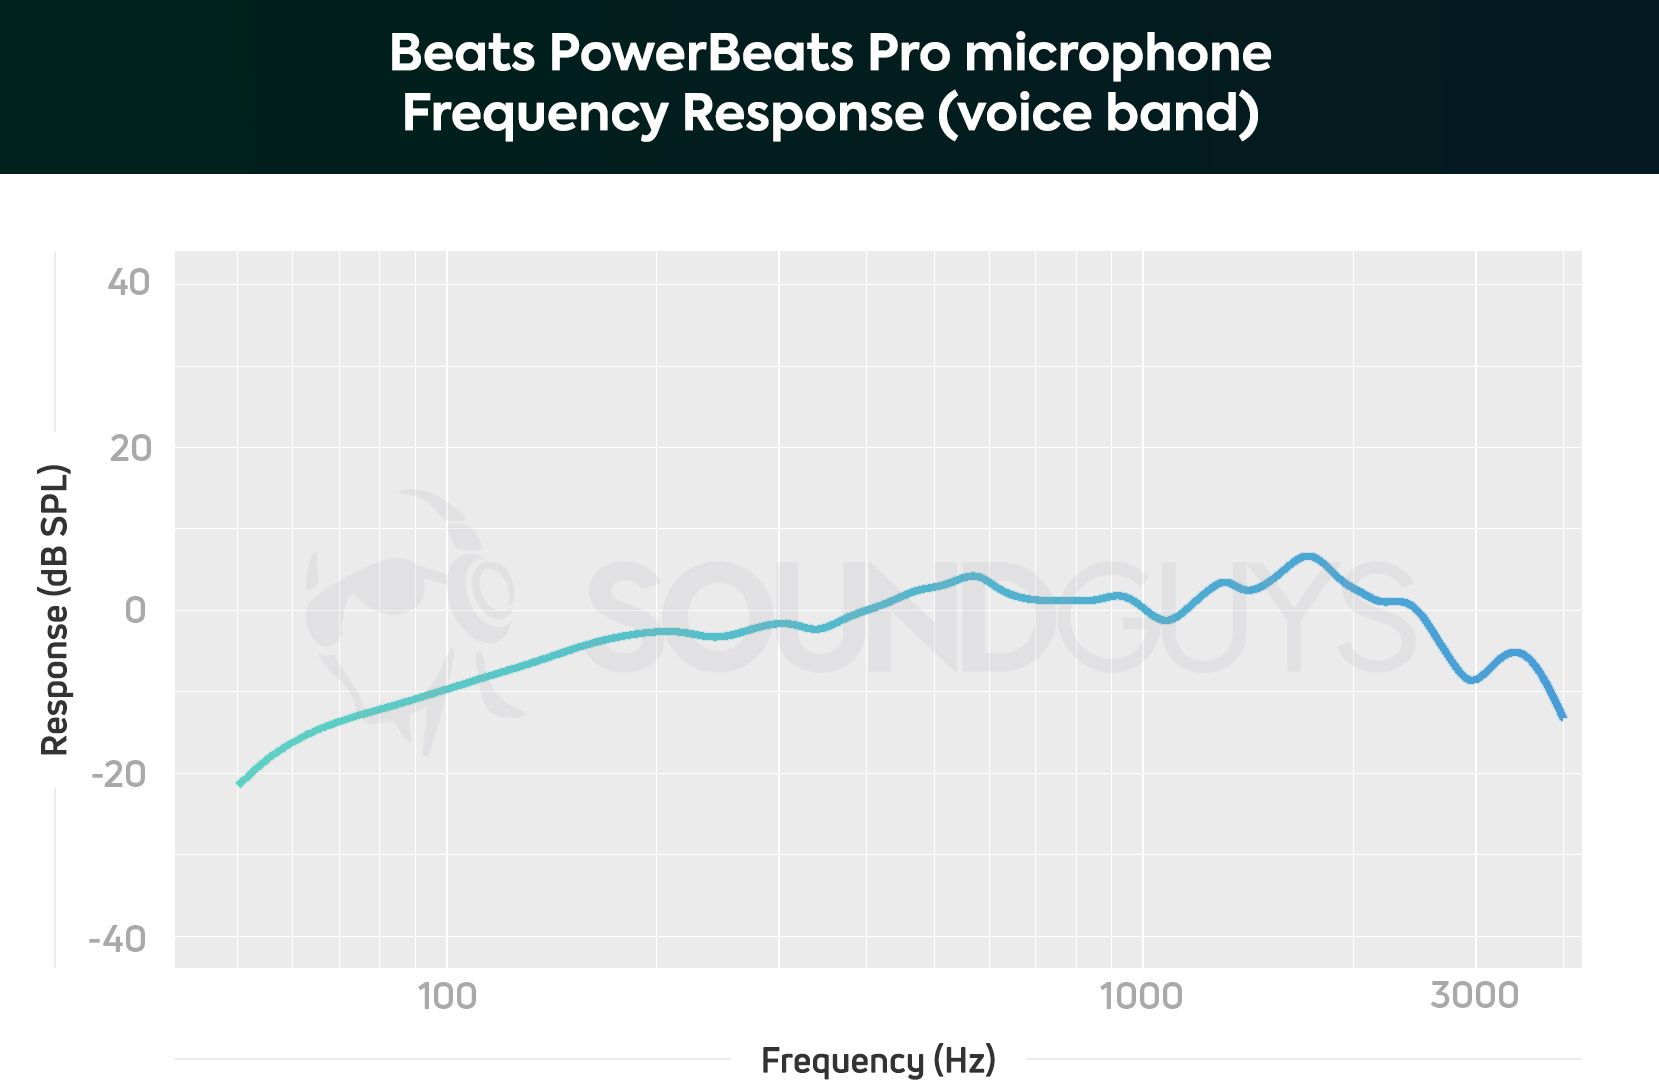 A chart showing the bass de-emphasized microphone performance of the Beats Powerbeats Pro.